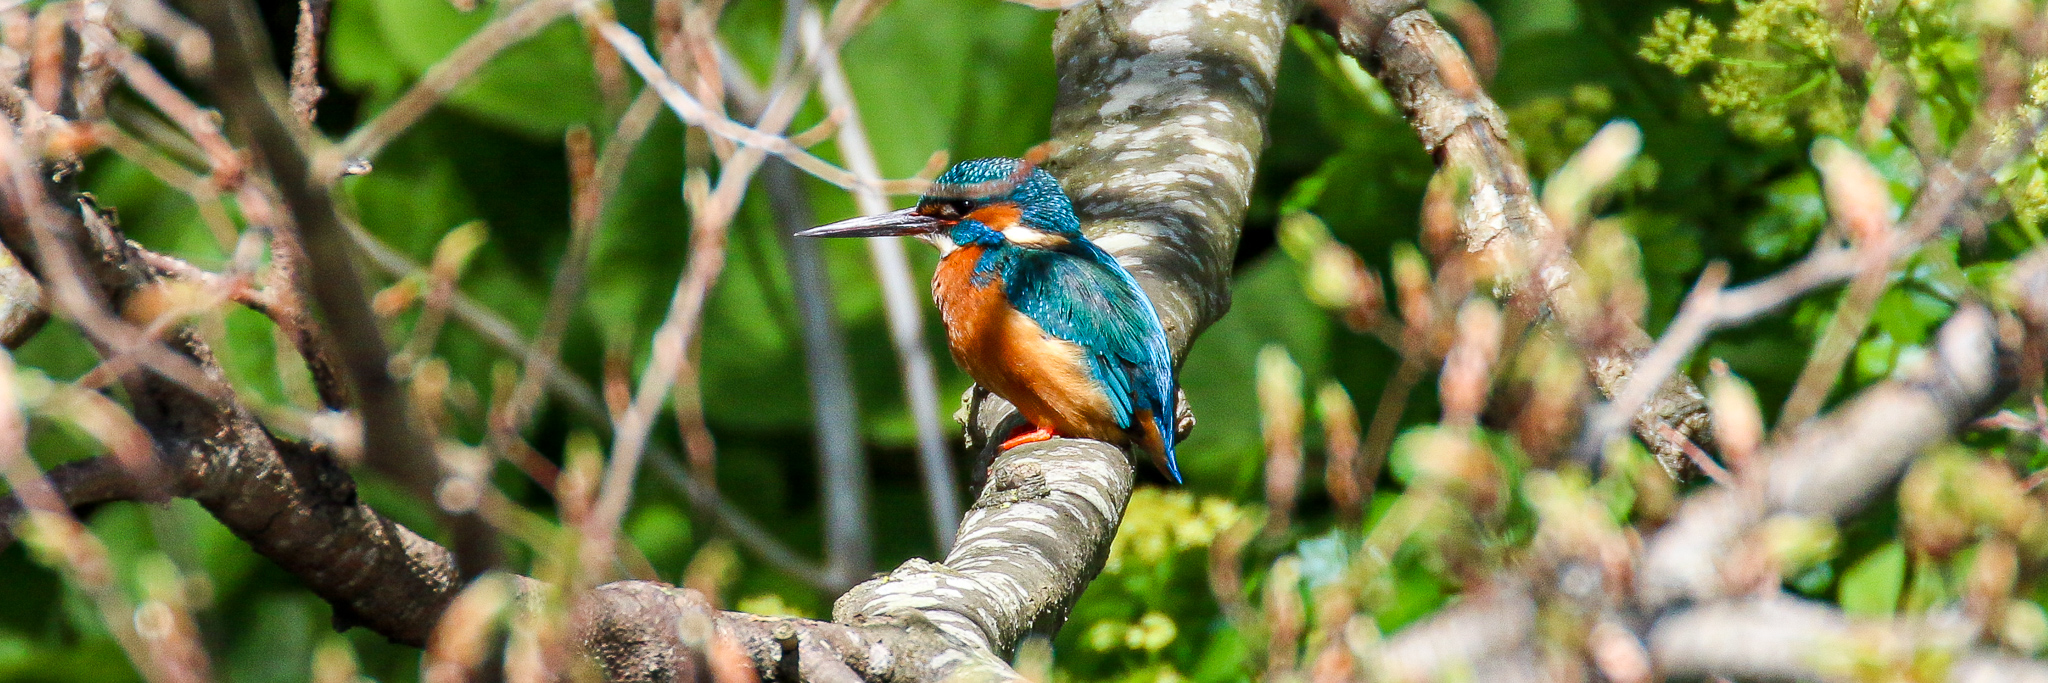 Kingfisher perched on a branch, River Dodder, Dublin, Ireland